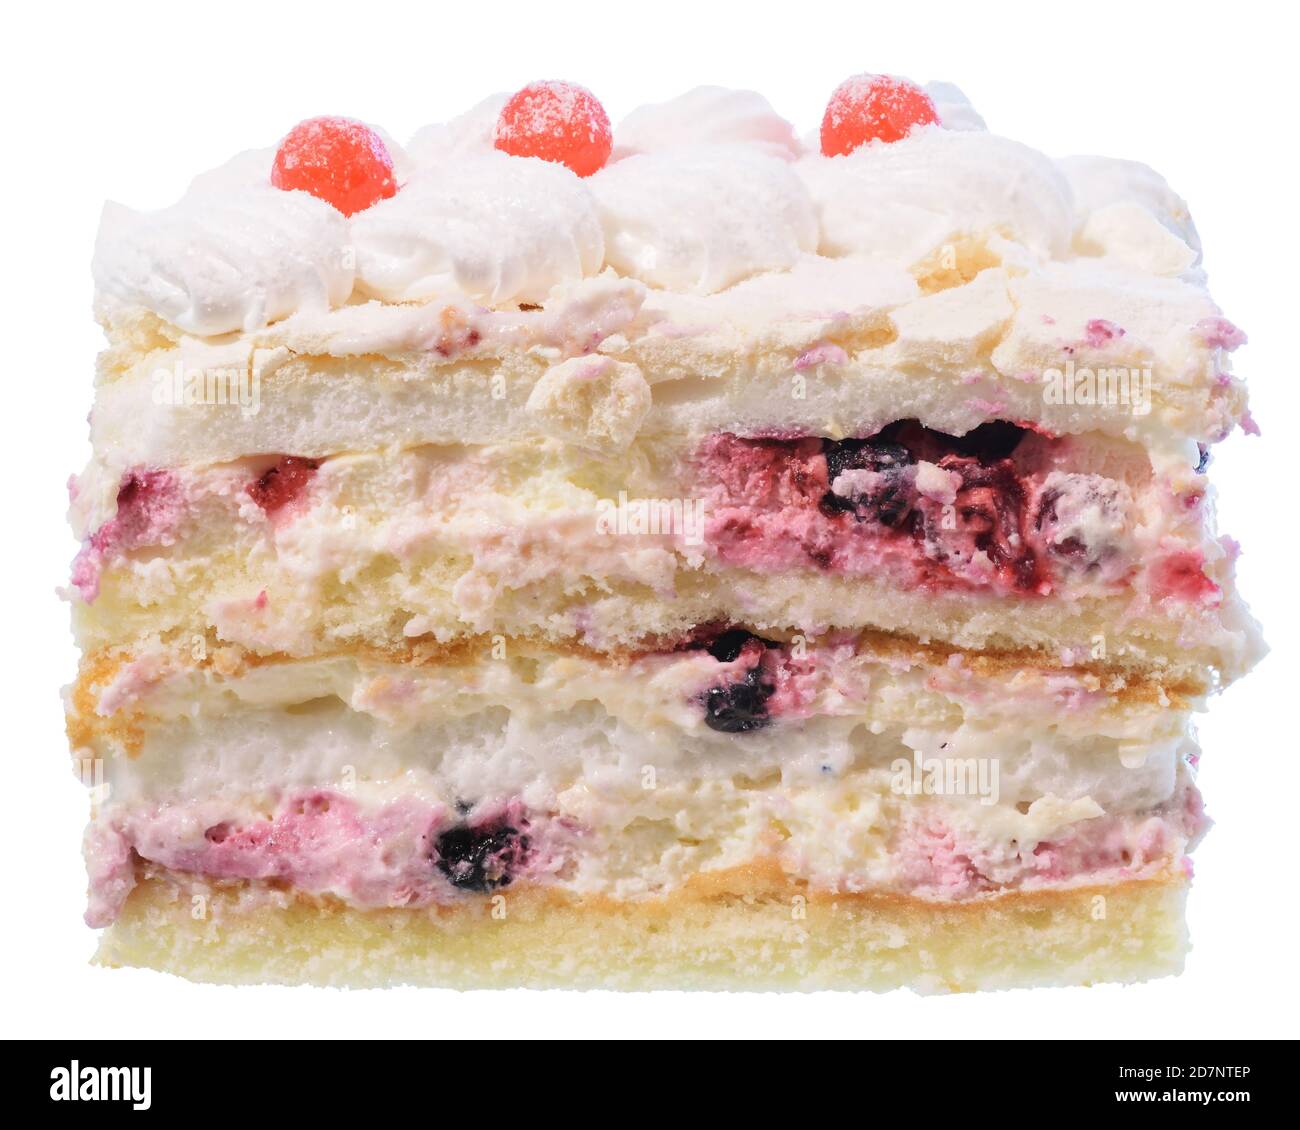 Cake with cream and blueberries isolated on a white background. Stock Photo